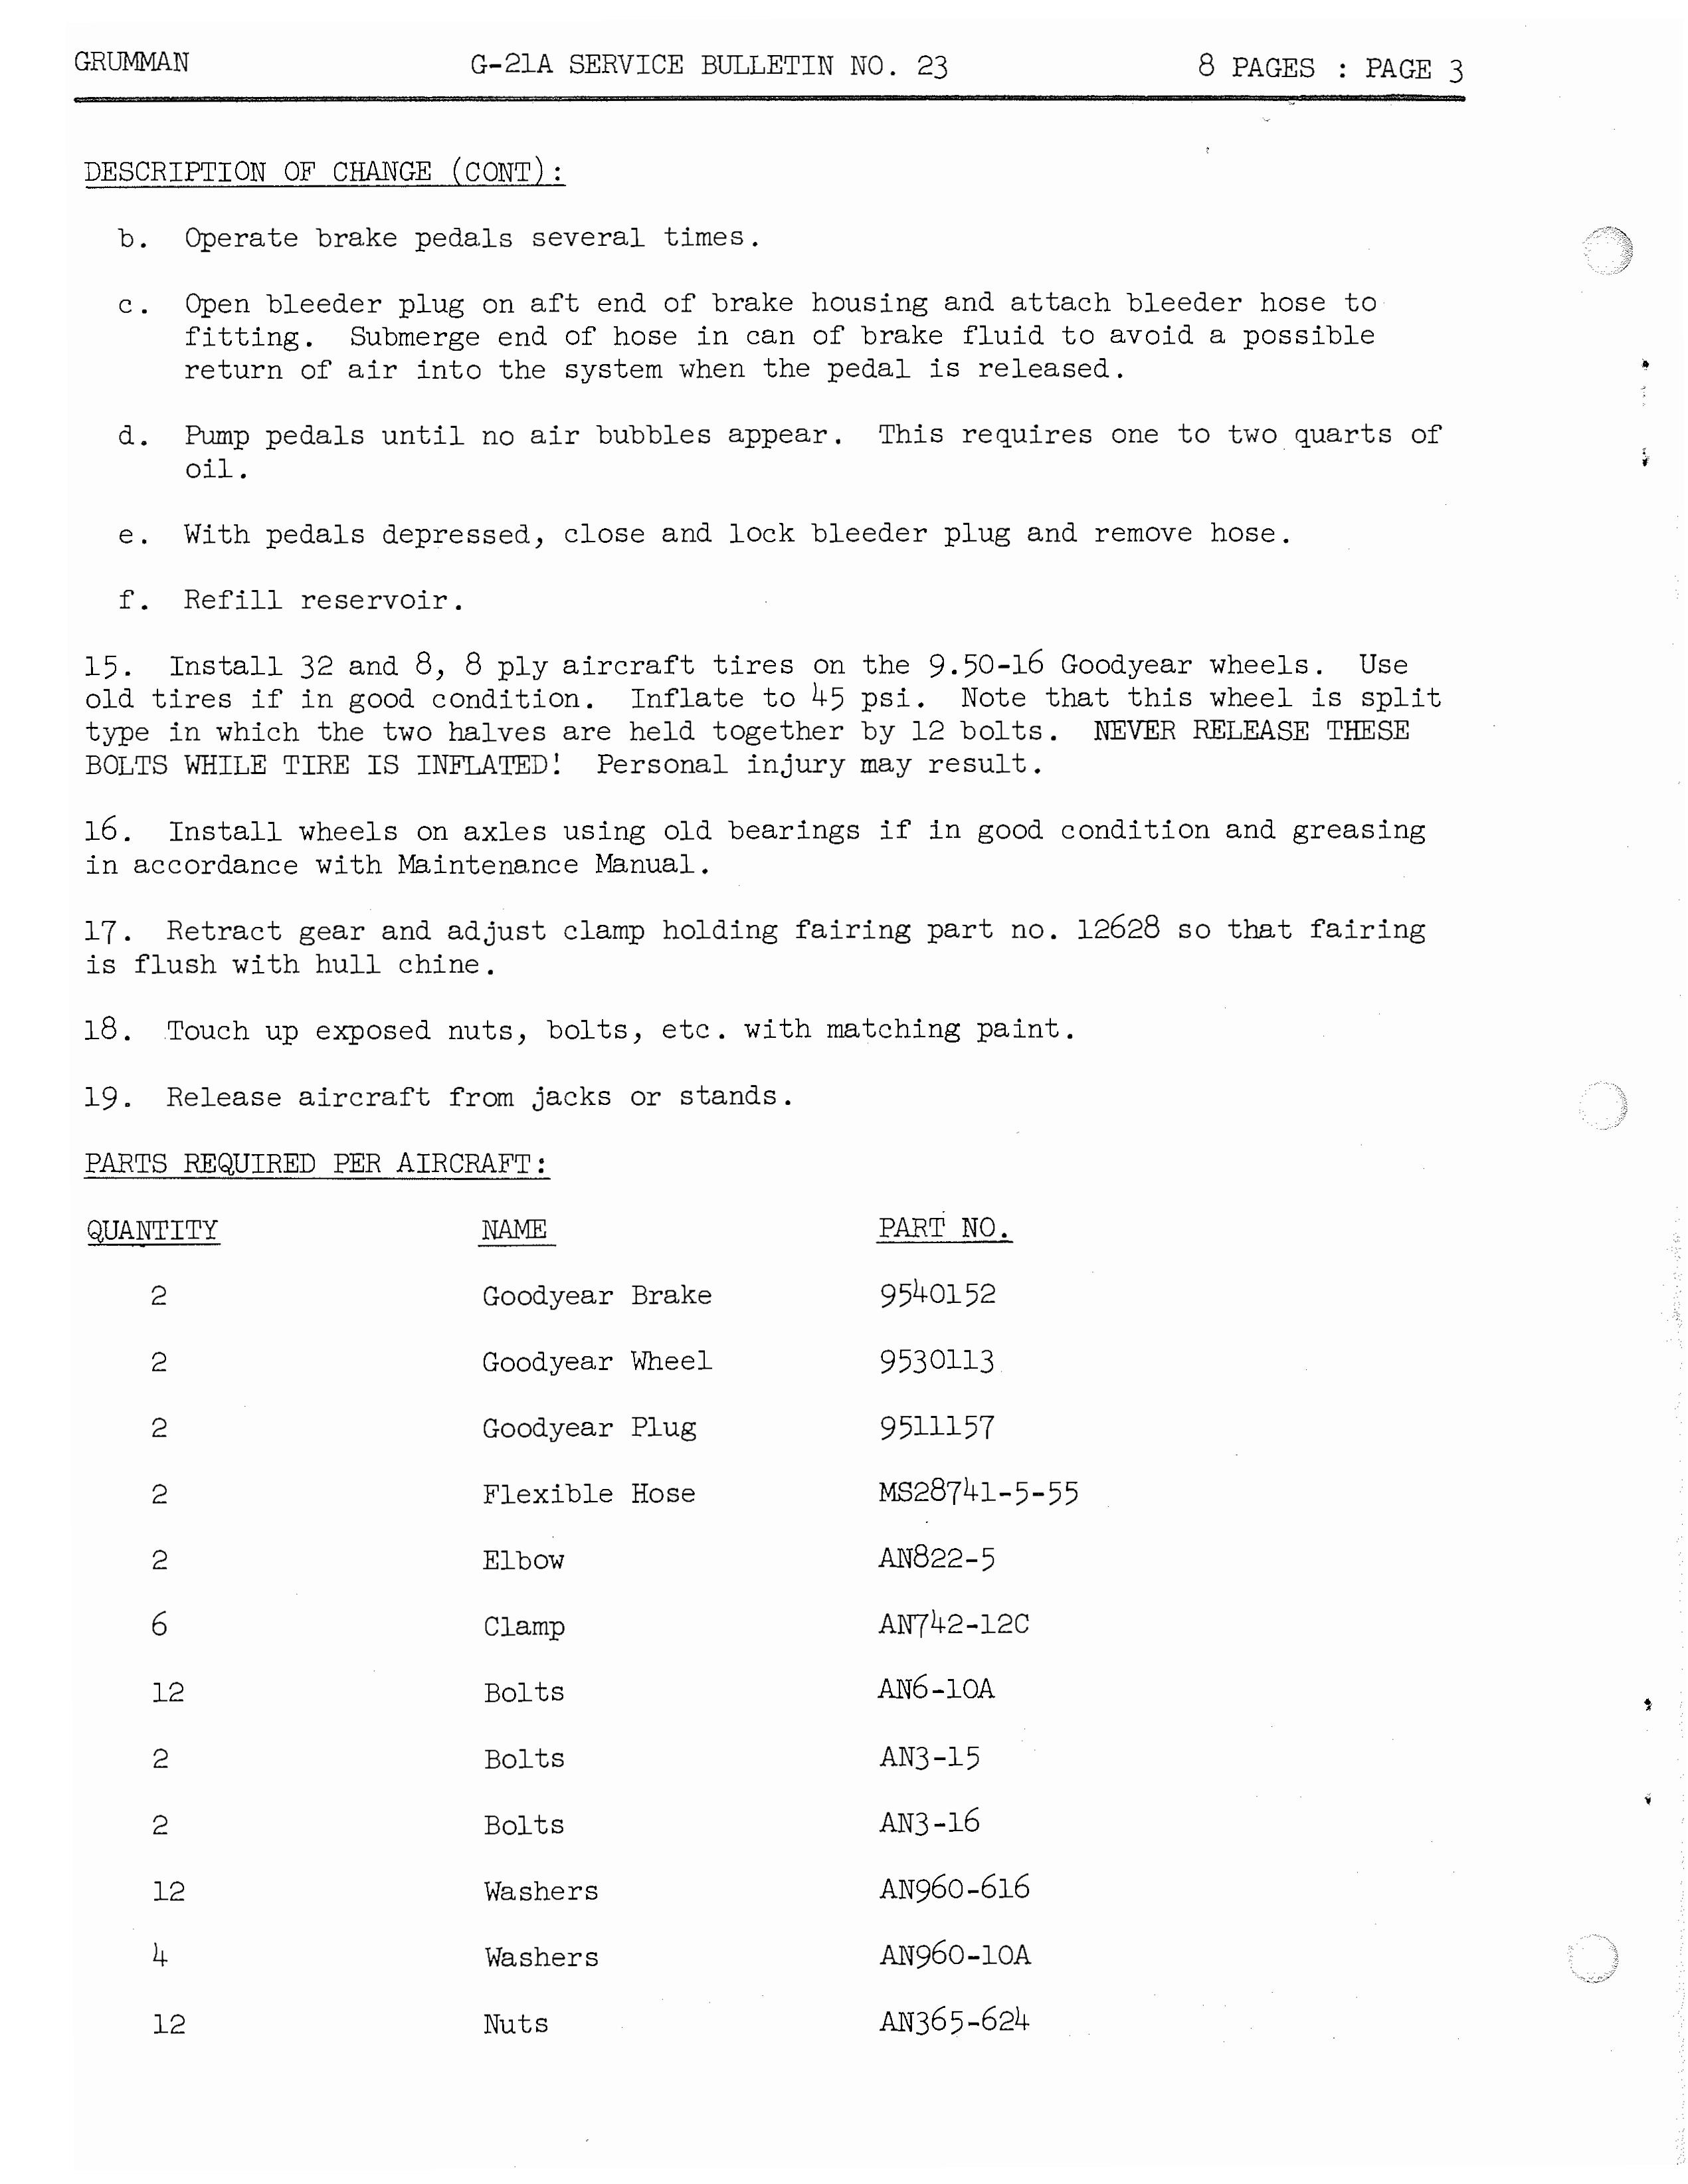 Sample page 4 from AirCorps Library document: Installation of Landing Gear and Brakes for G-21A